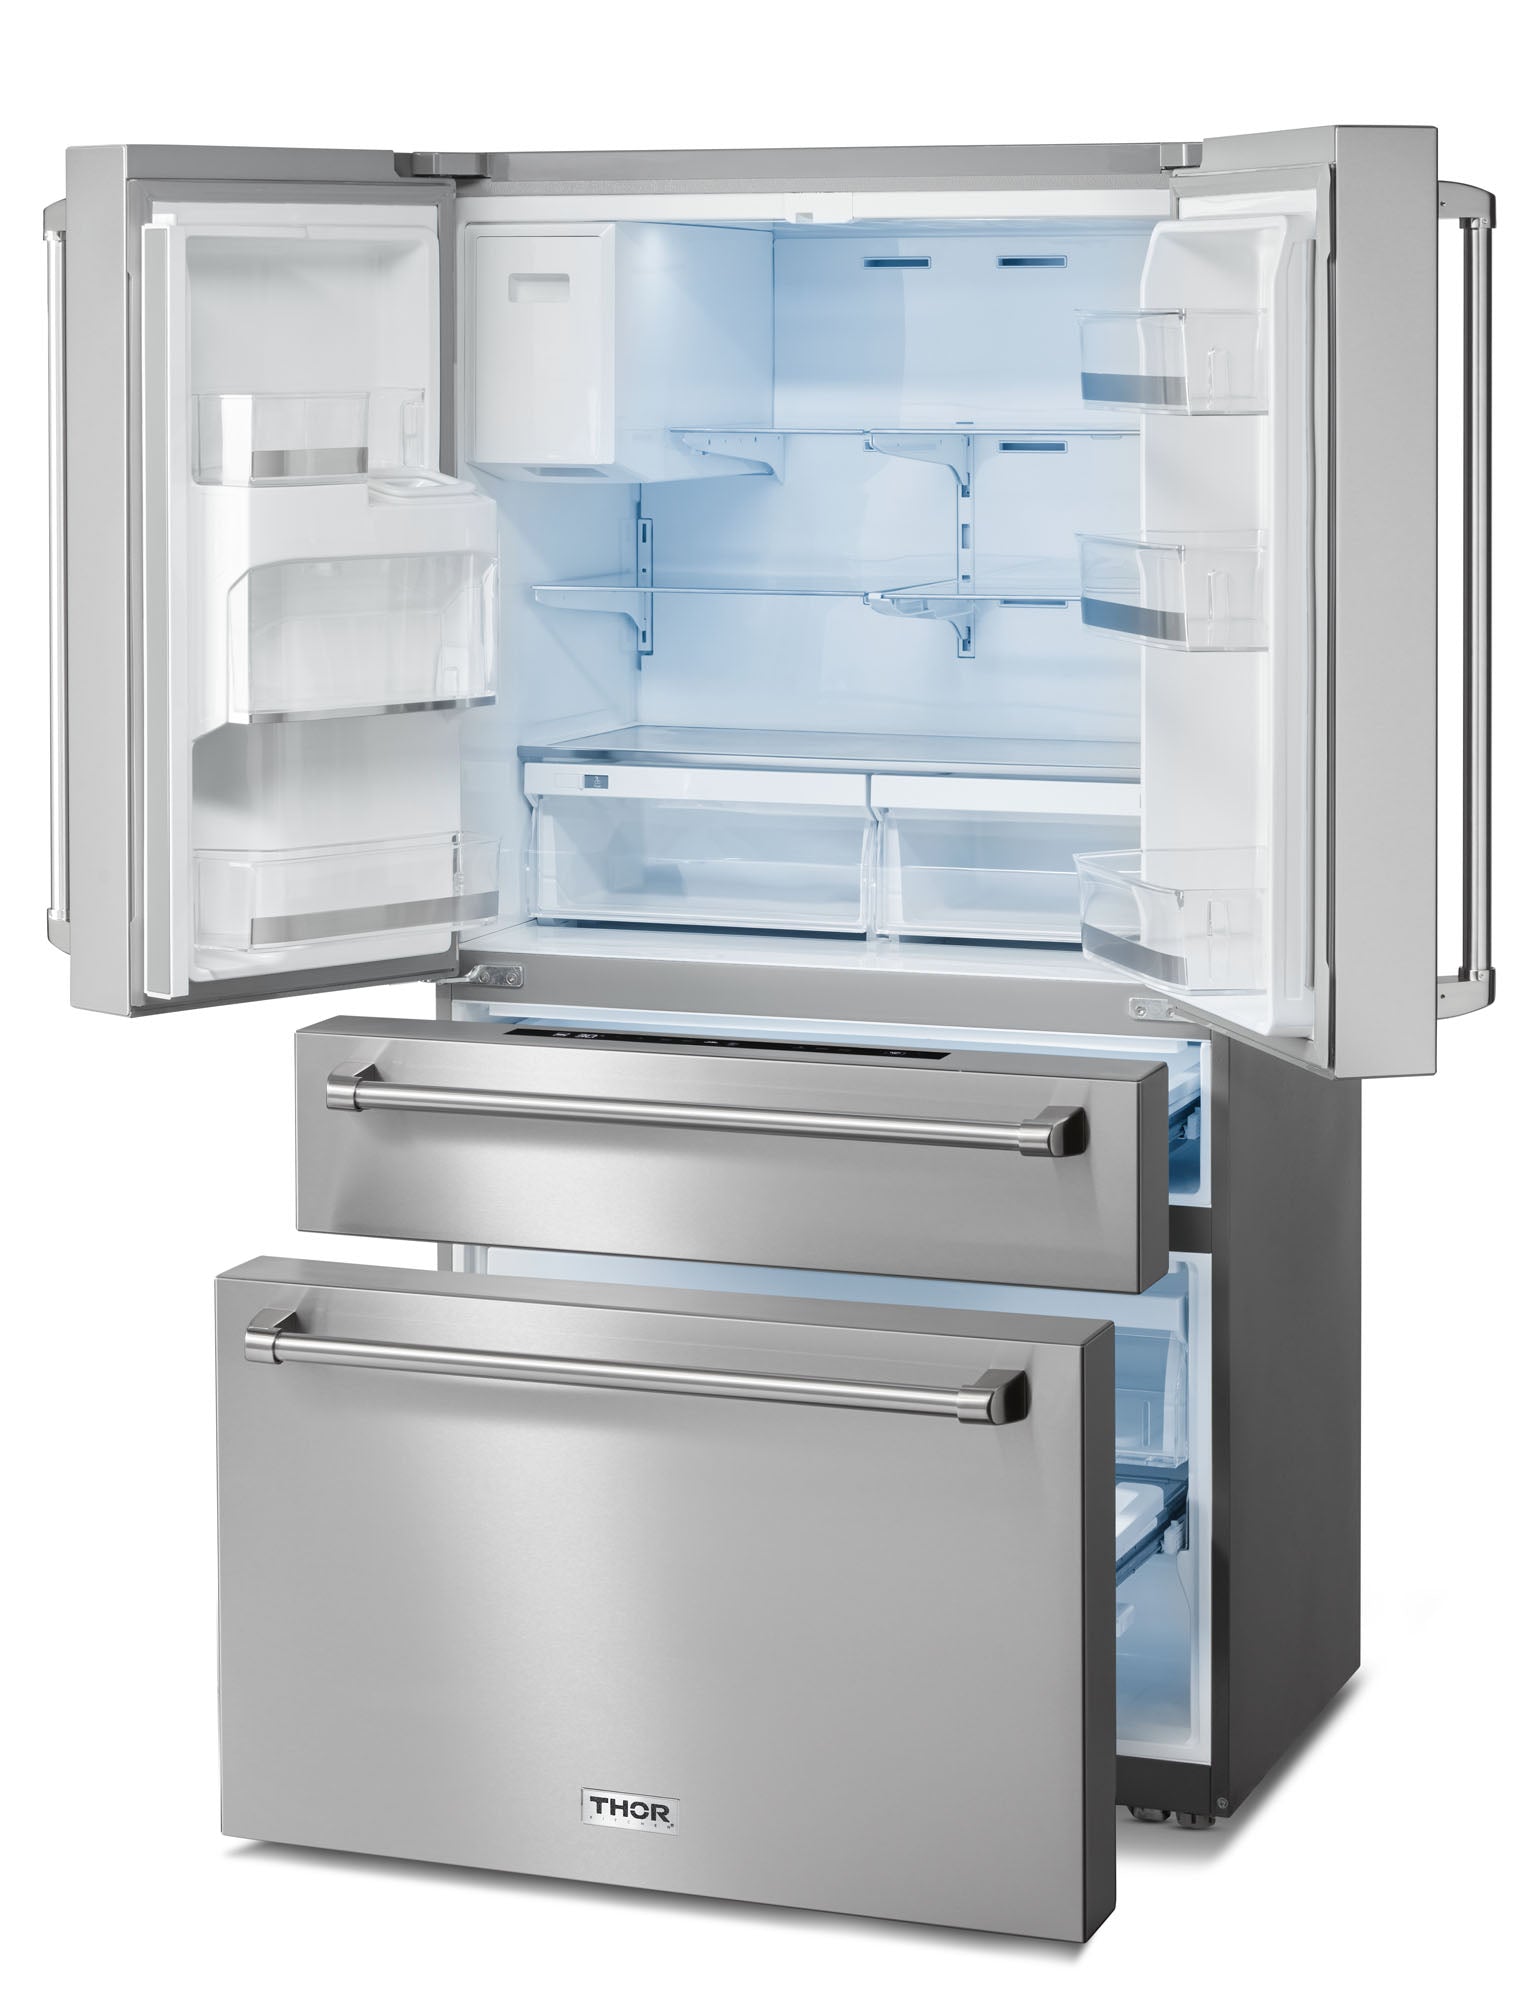 Thor Kitchen 36 Inch Professional French Door Refrigerator with Ice and Water Dispenser- Model TRF3601FD